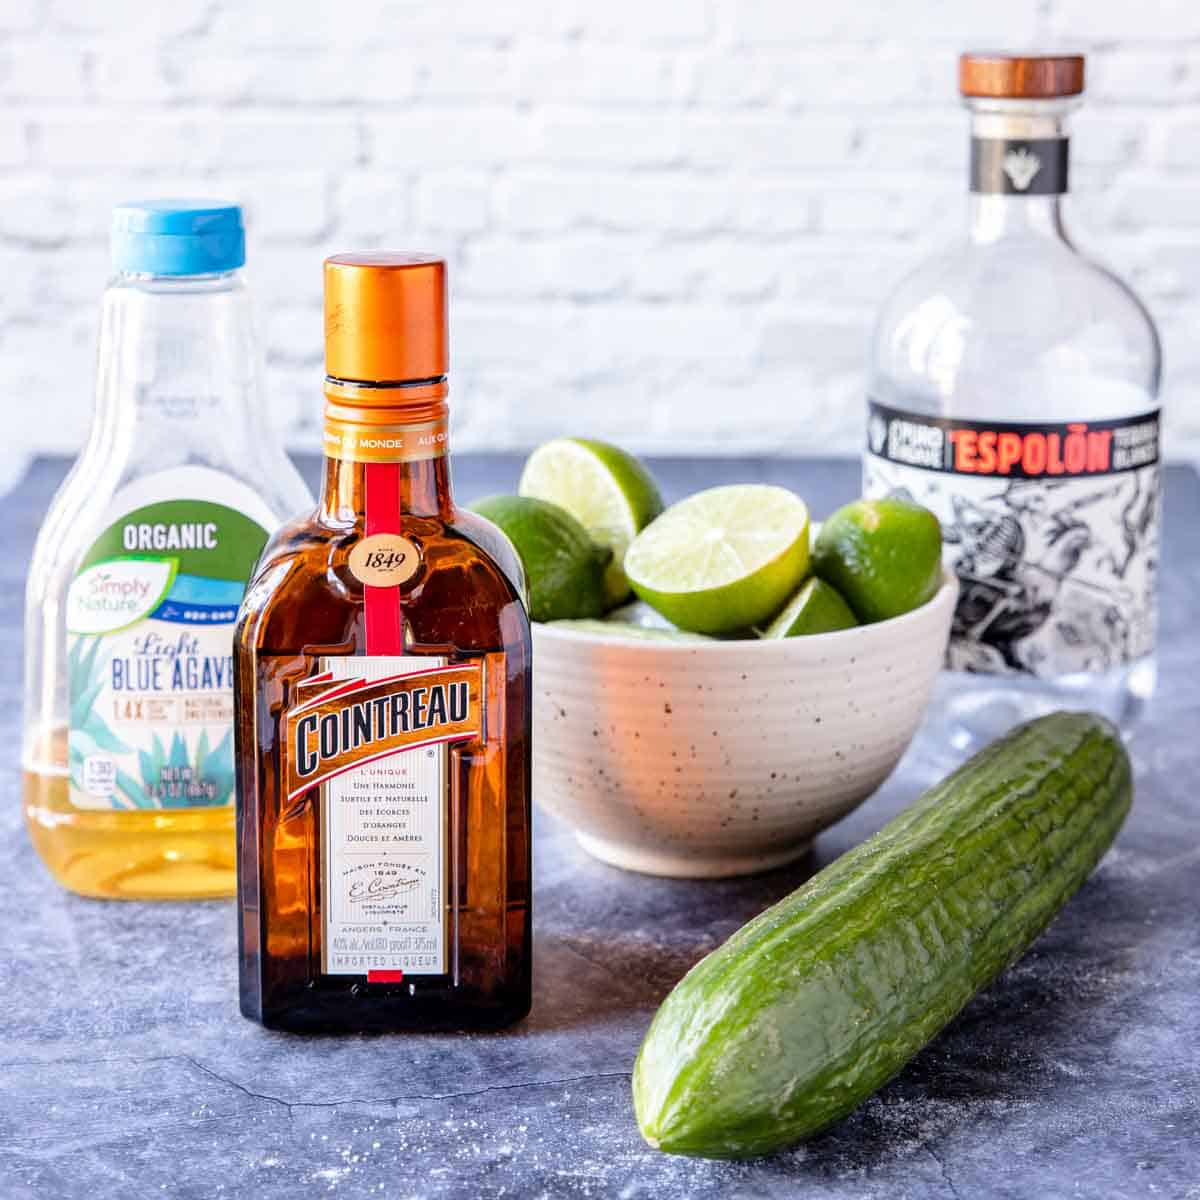 Ingredients for cucumber margaritas on a table